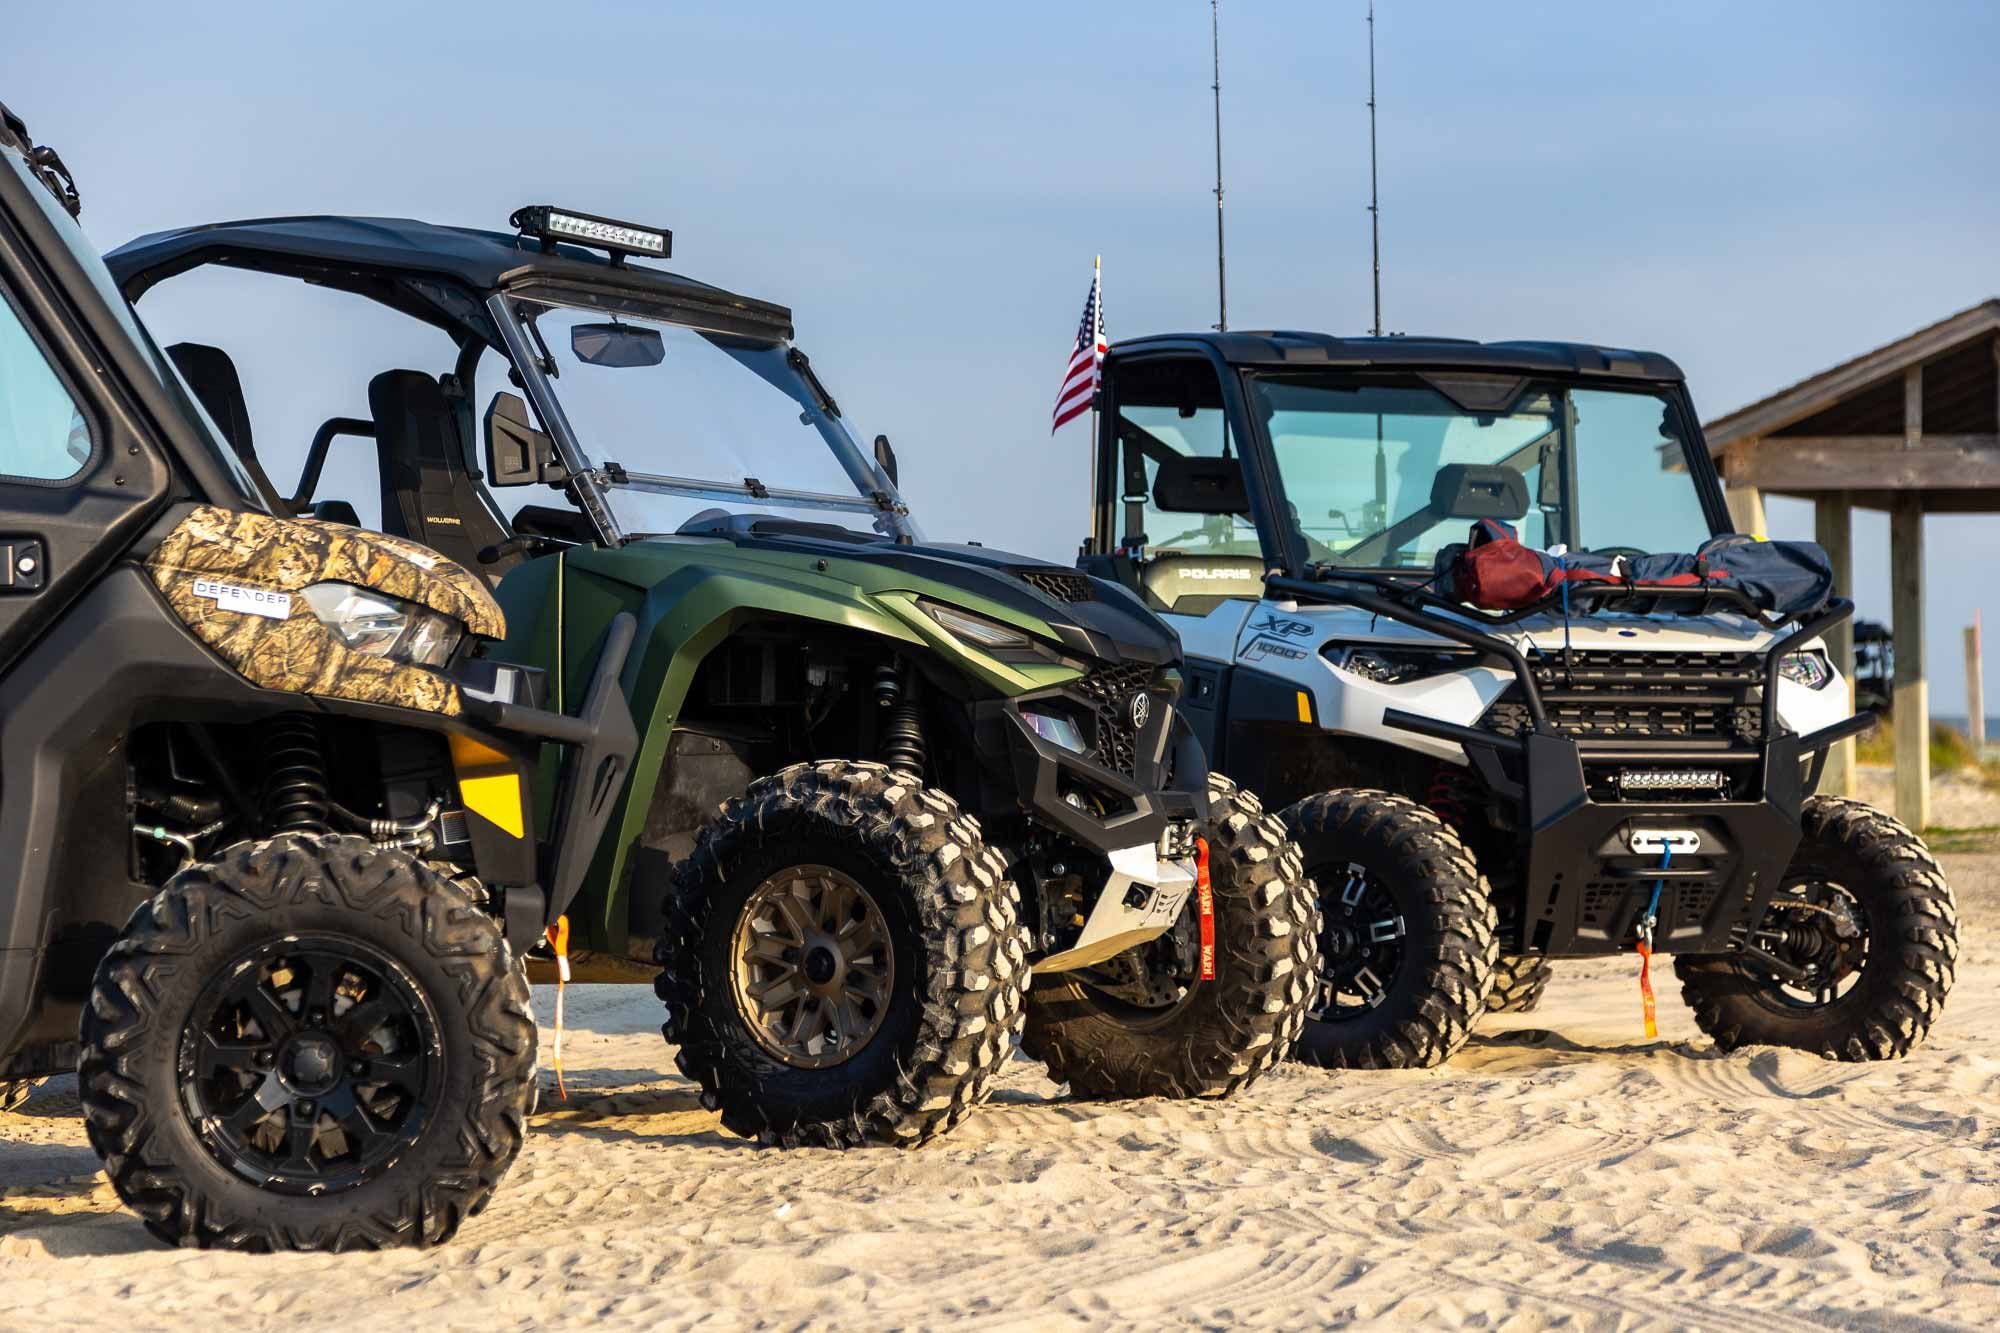 A trio of great UTVs enjoying some time at the beach.